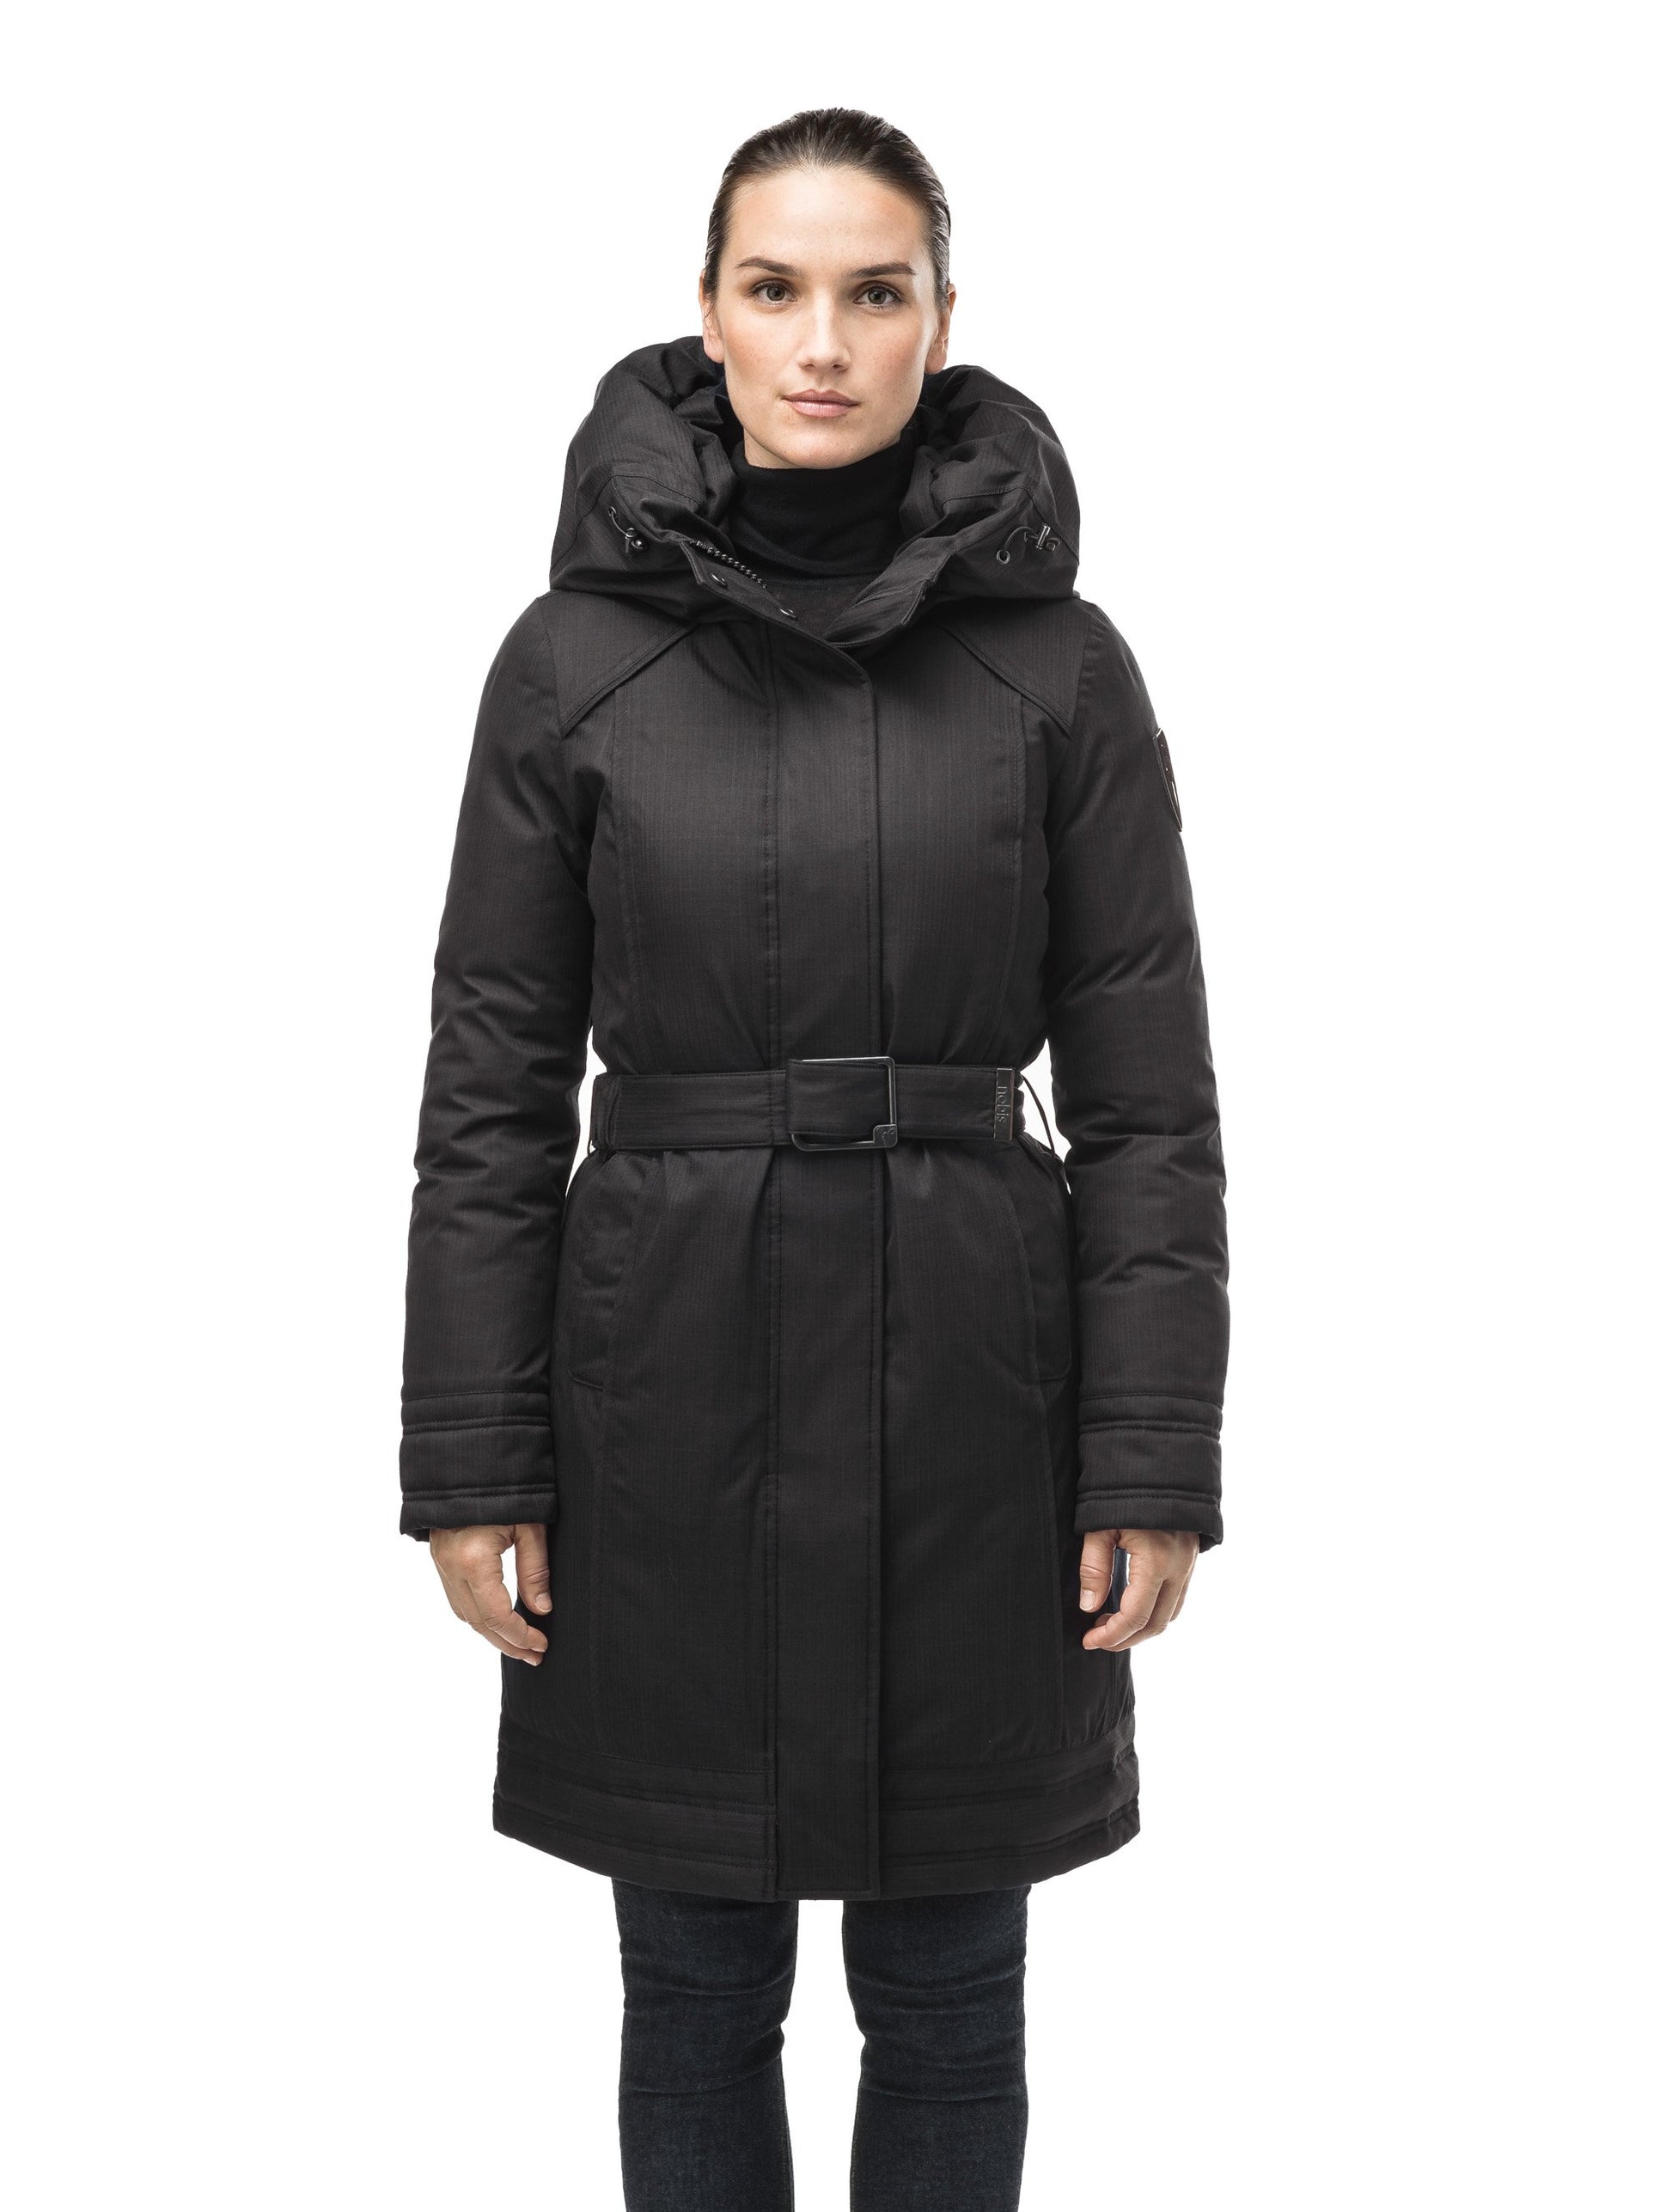 Women's Thigh length own parka with a furless oversized hood in CH Black